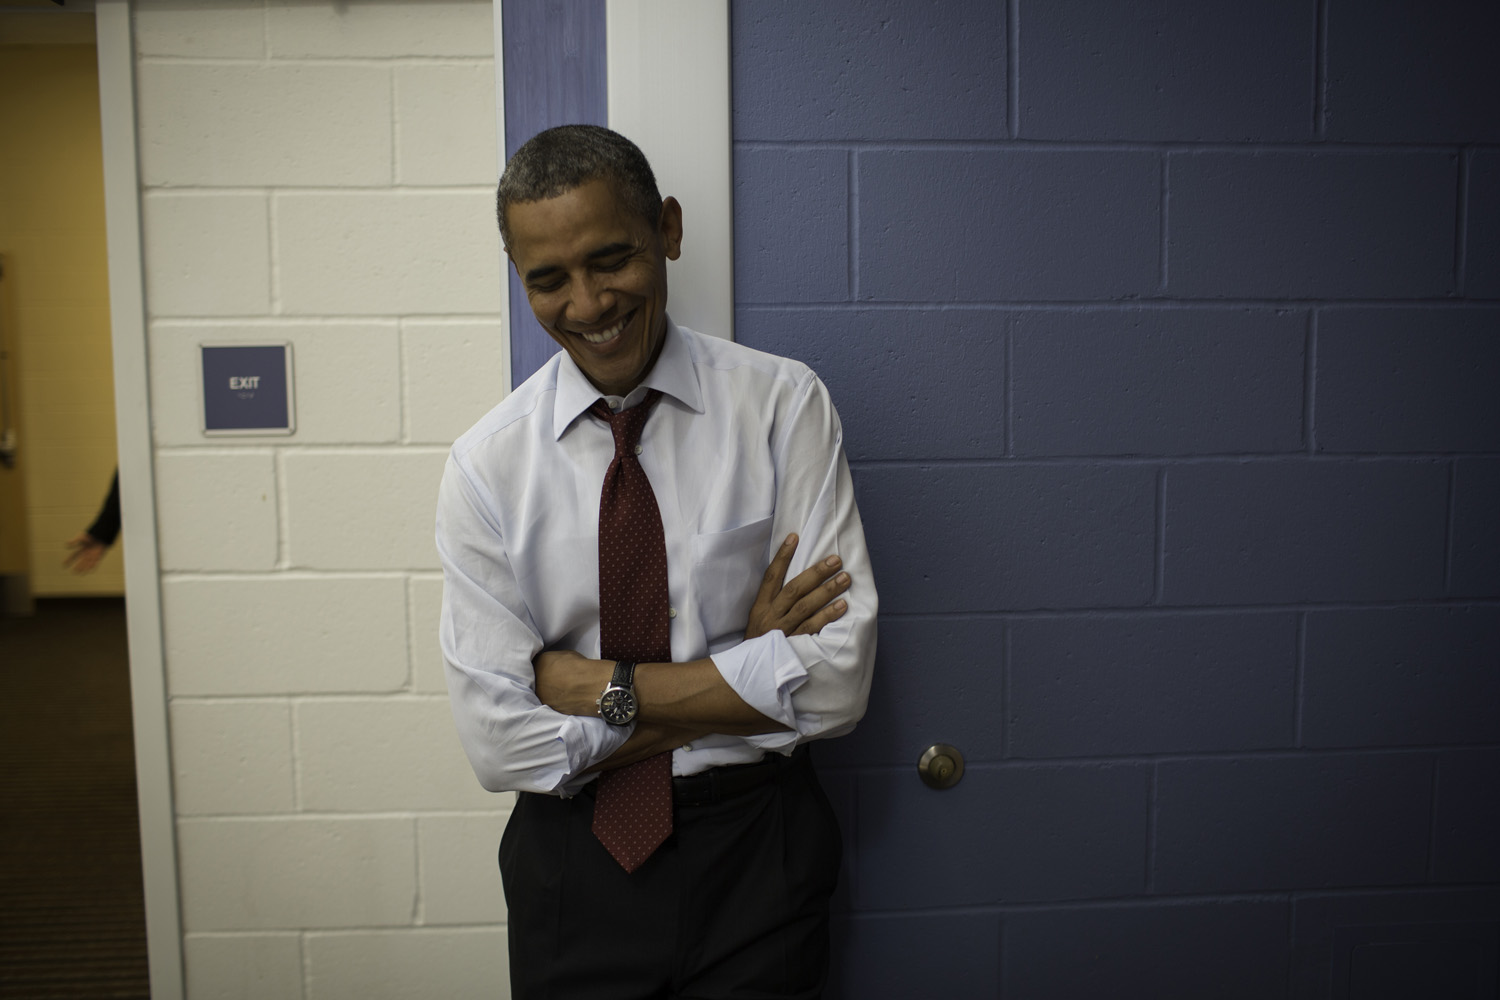 Image: President Obama waits in the hallway while being introduced at a rally at Windham High School in Windham, N.H. Aug. 18, 2012.